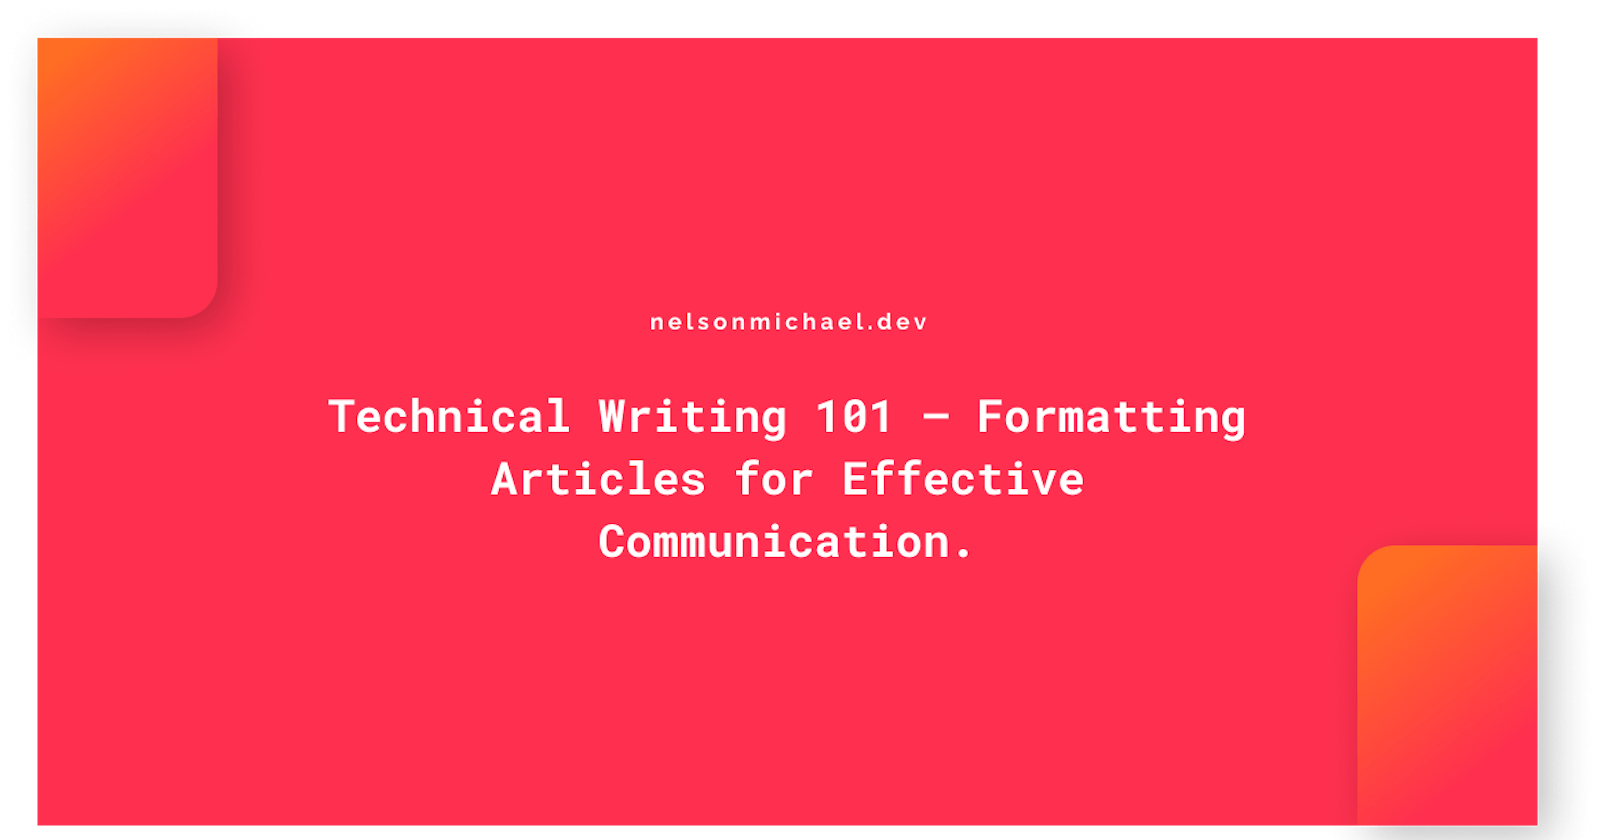 Technical Writing 101 ⁠— Formatting Articles for Effective Communication